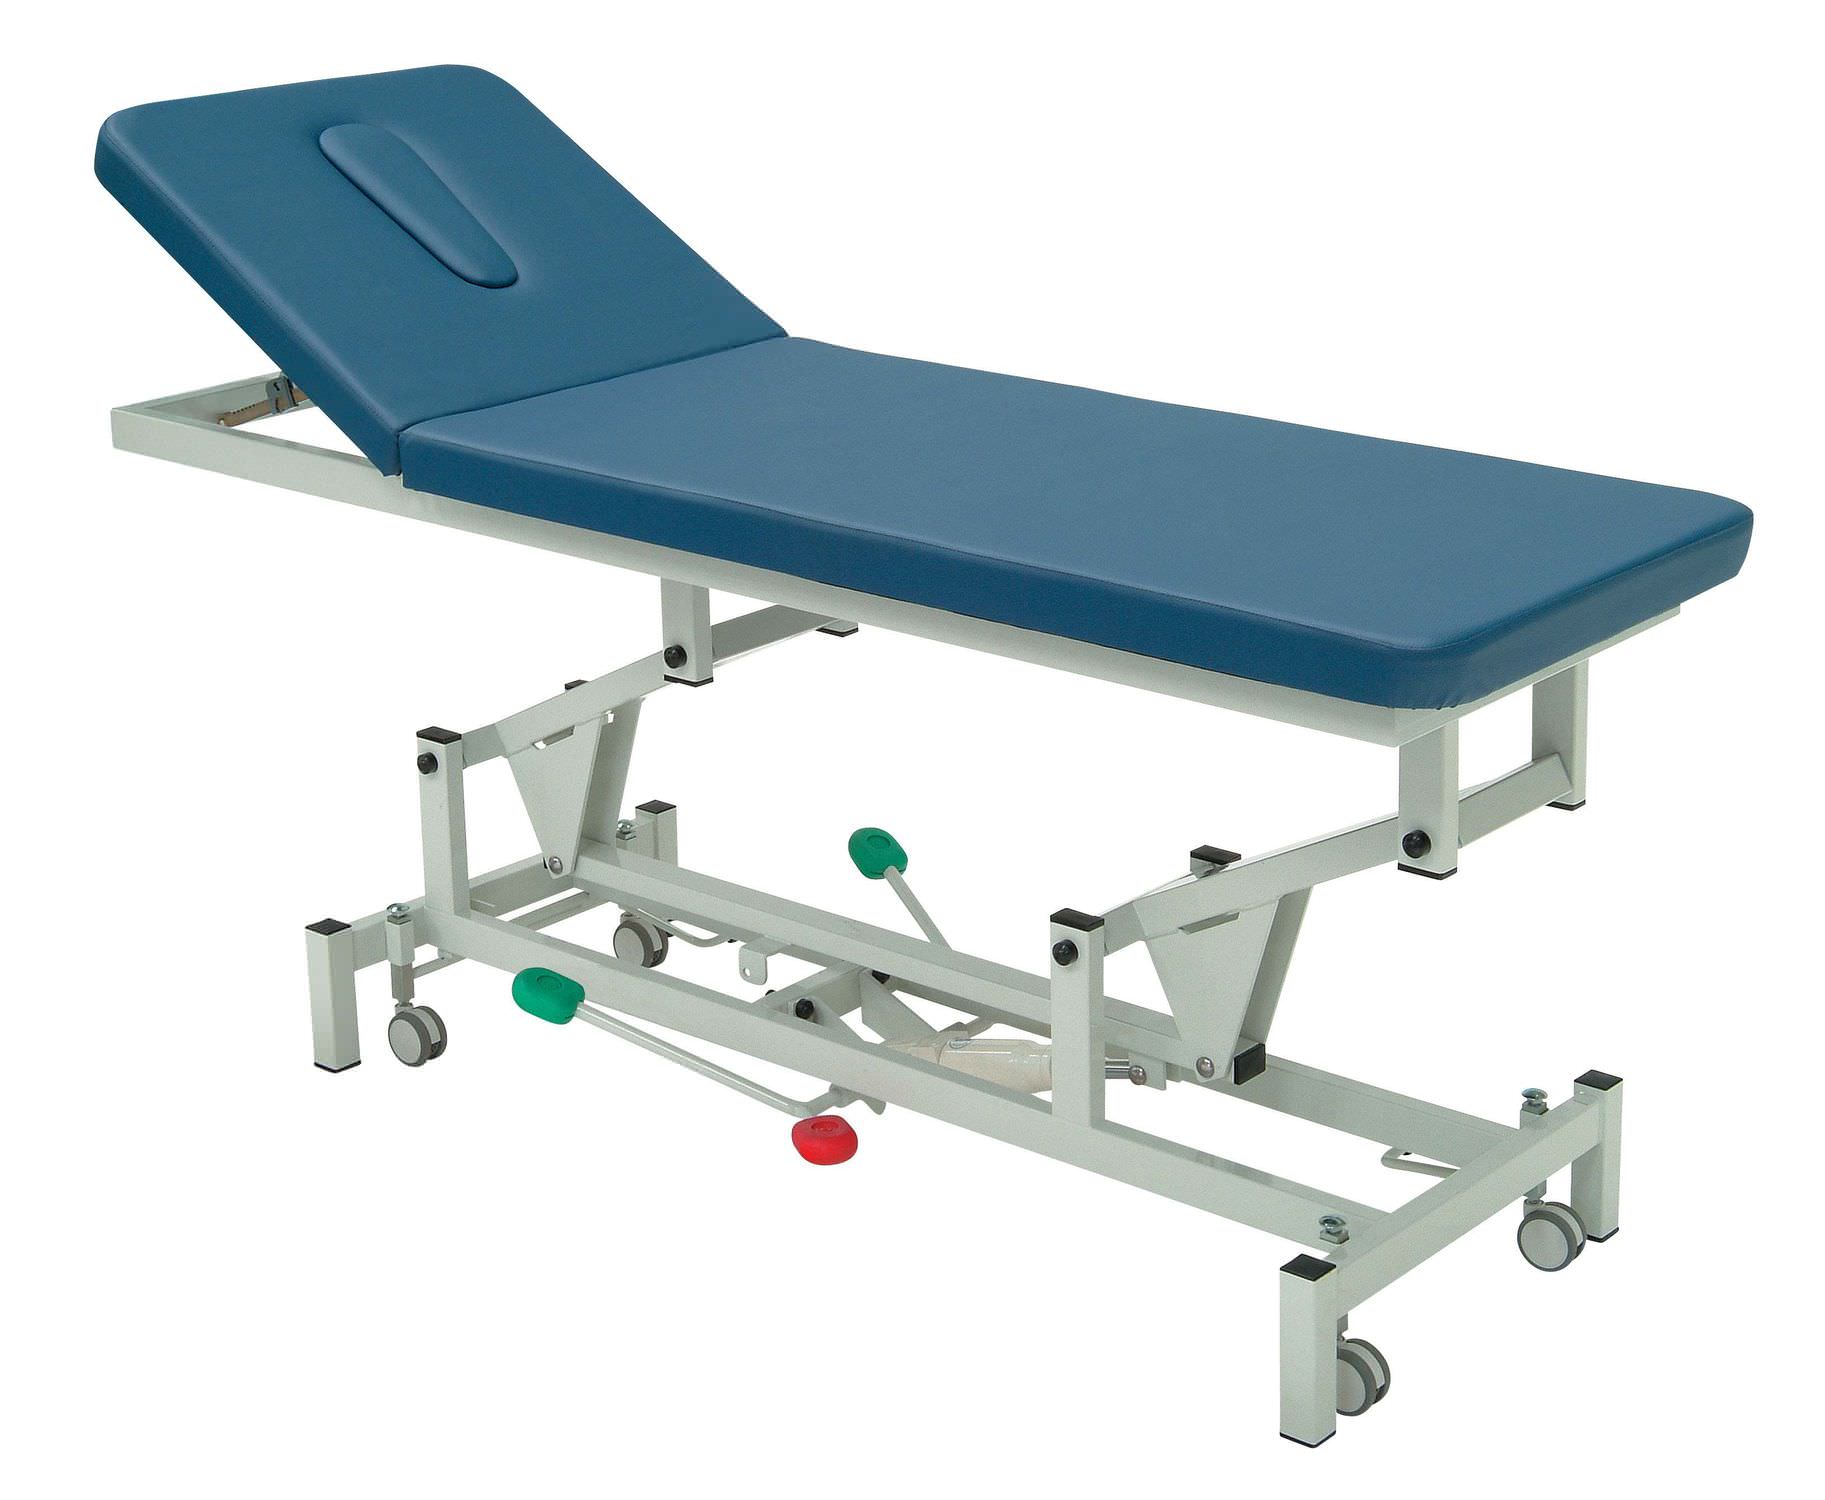 Hydraulic massage table / on casters / height-adjustable / 2 sections 14770 Inmoclinc